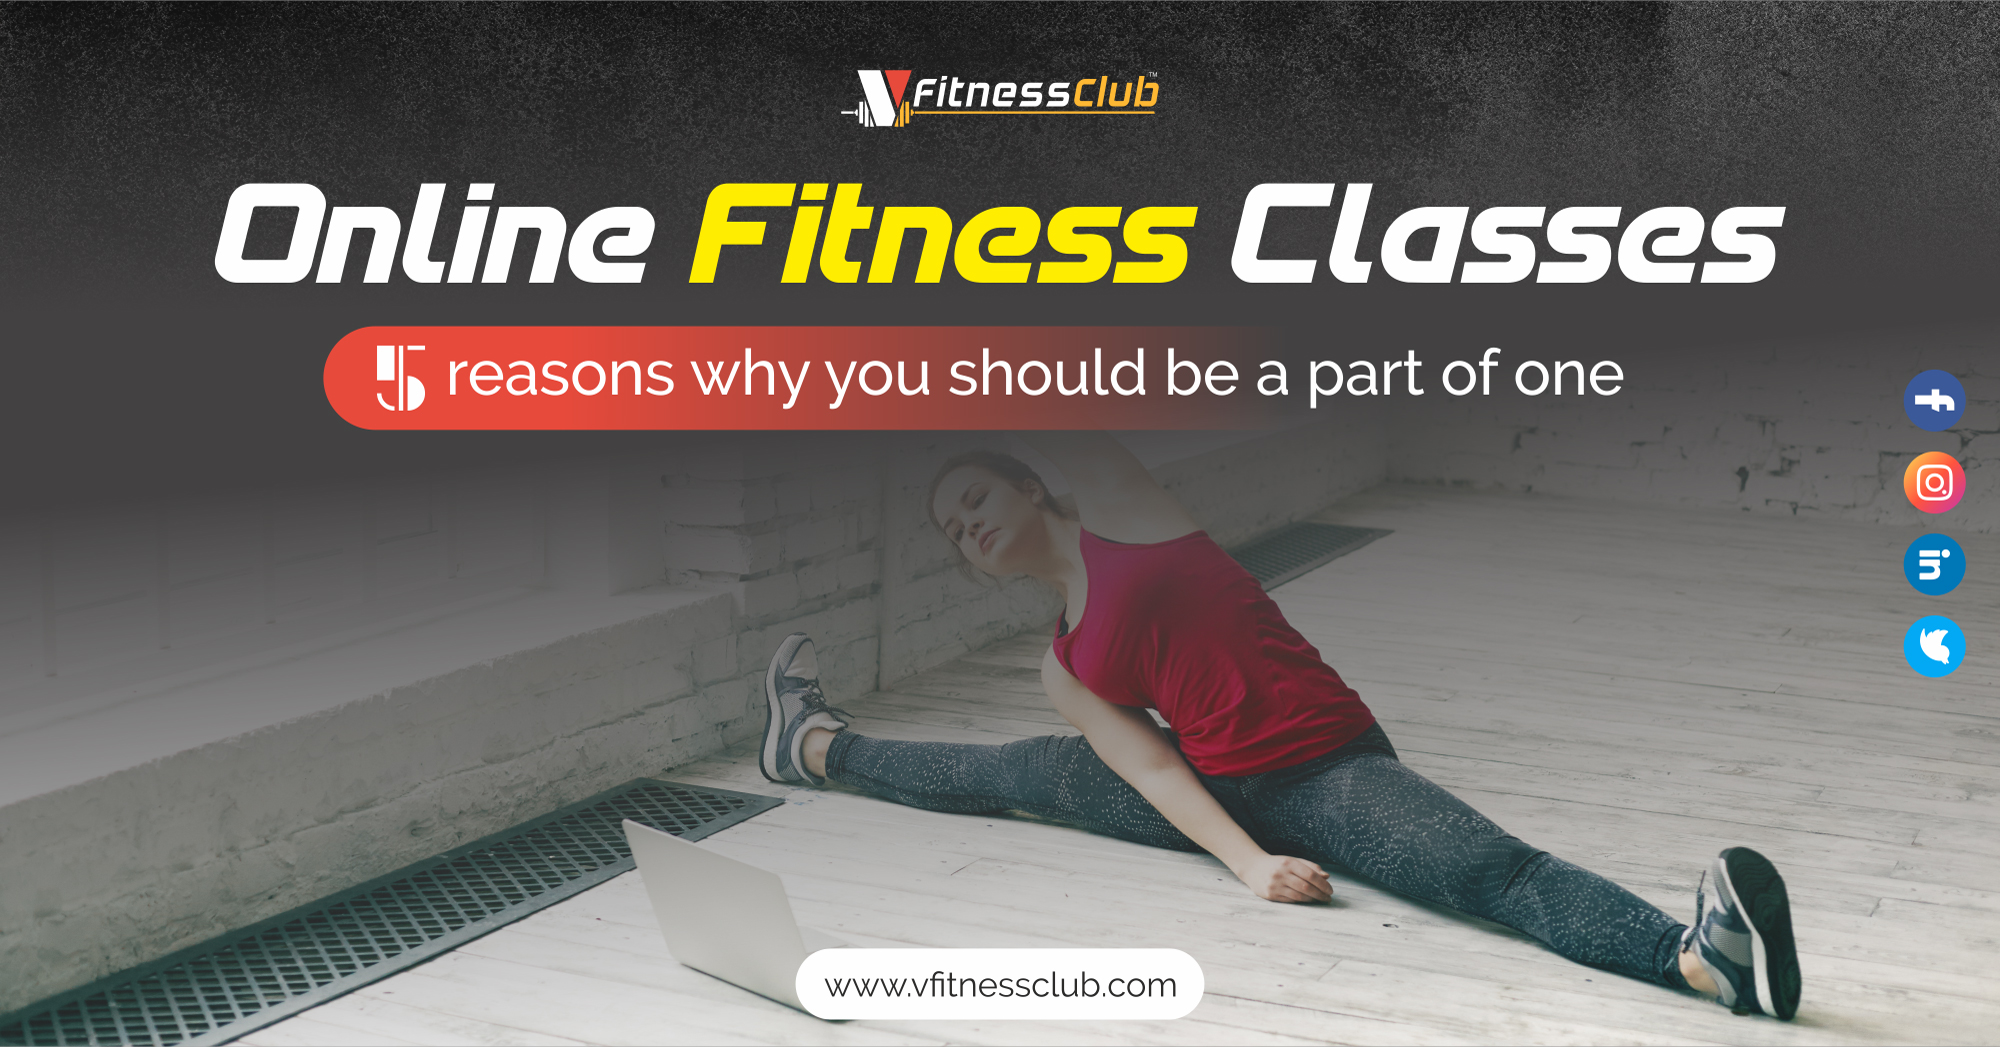 Online Fitness Classes: 5 Reasons Why You Should Be a Part of One